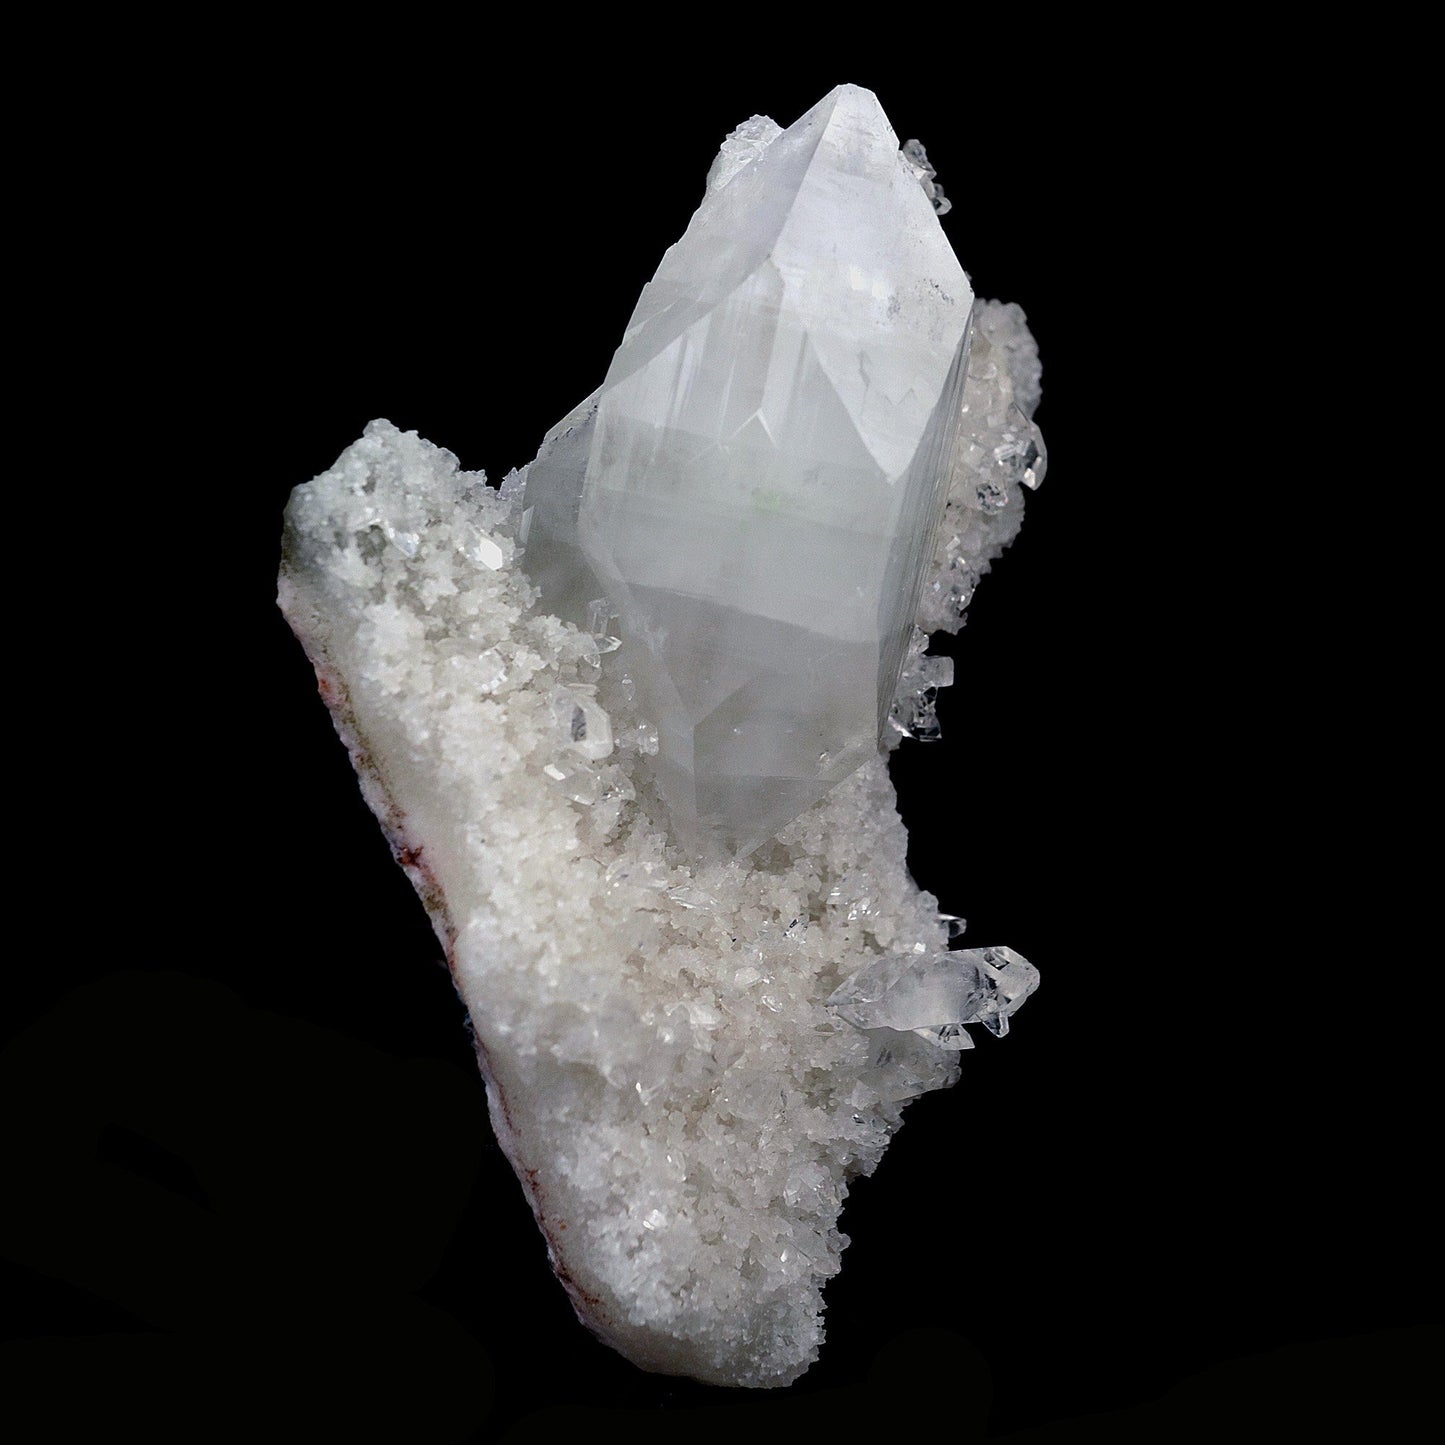 Pointed Apophyllite Crystal on Chalcedony Natural Mineral Specimen # B…  https://www.superbminerals.us/products/pointed-apophyllite-crystal-on-chalcedony-natural-mineral-specimen-b-4120  Features:One big intersecting doubly-terminated crystal of colorless Apophyllite perched on small plate of white chalcedony Microcrystals. The tip of the smaller crystal is cleaved with a clean surface. Primary Mineral(s): ApophylliteSecondary Mineral(s): StilbiteMatrix: N/A10 cm x 6 cm 150 GmsLocality: Jalgaon